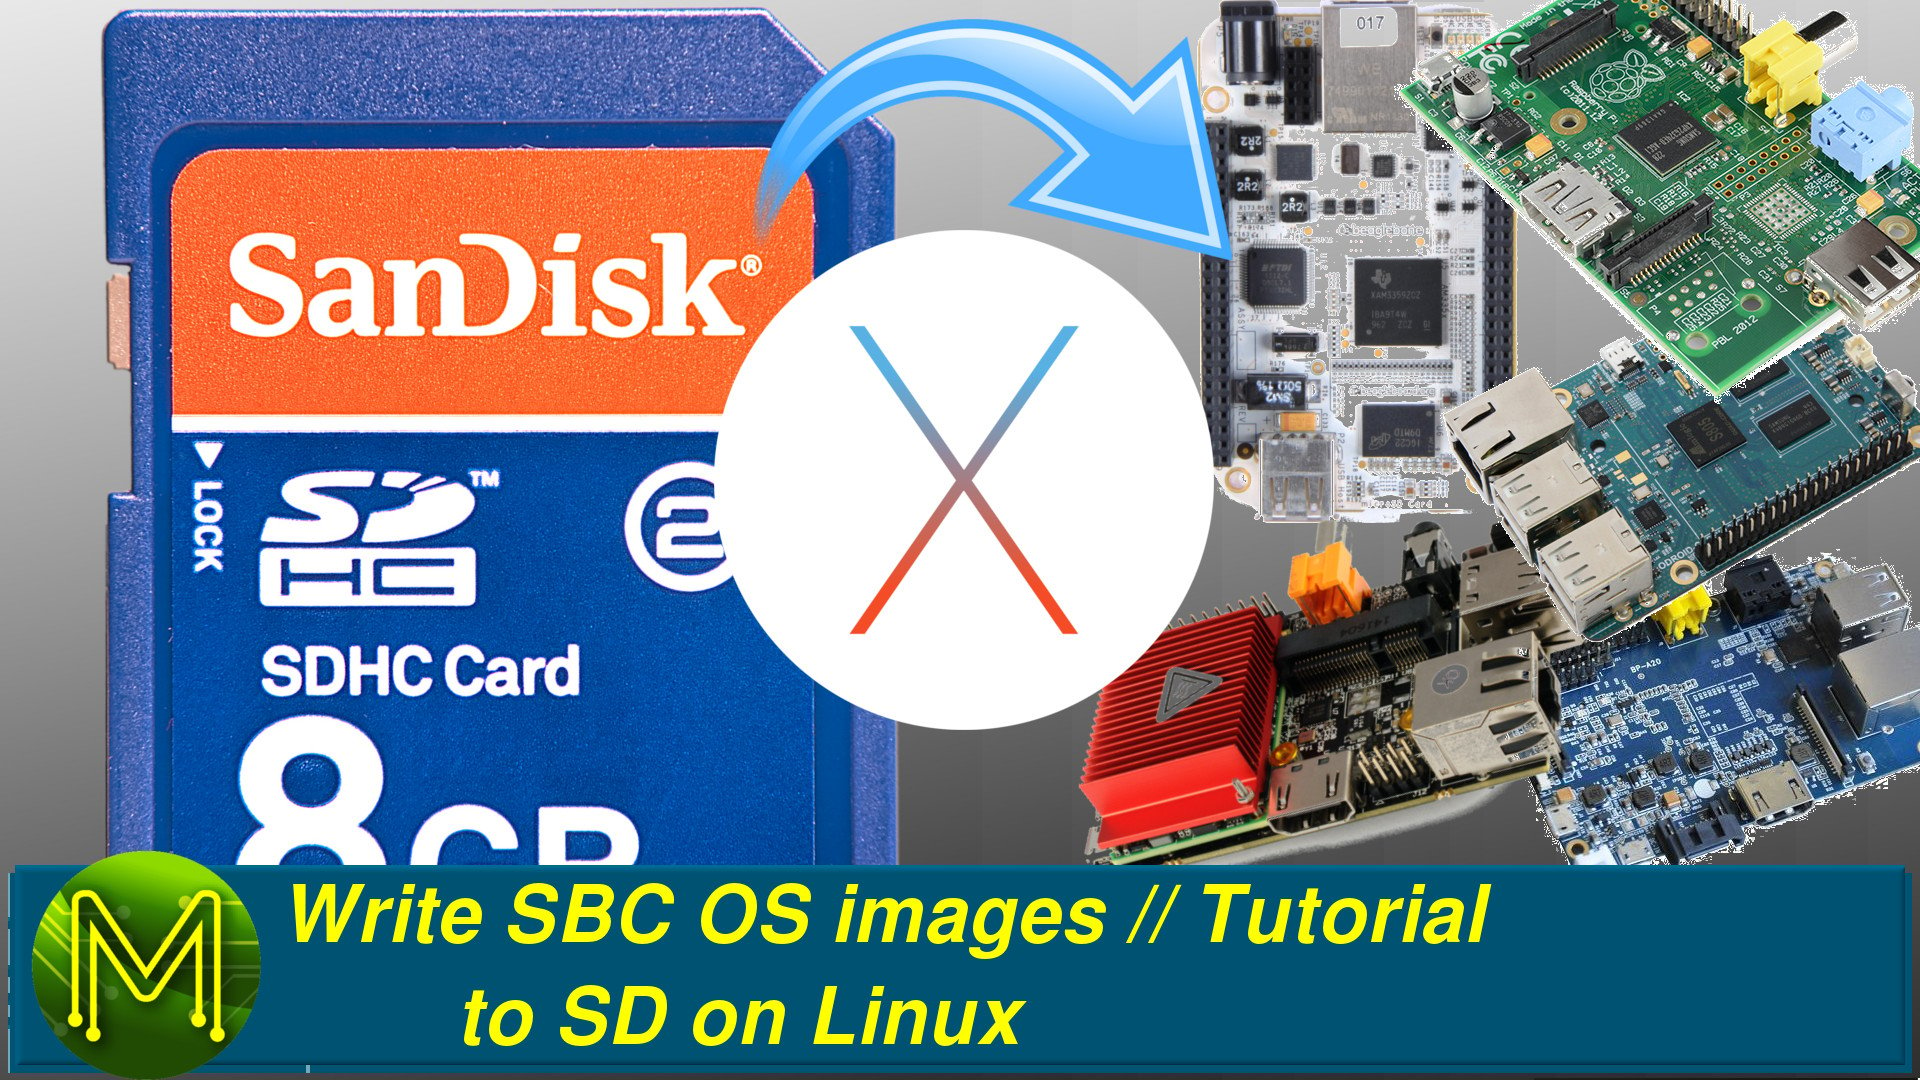 Write SBC OS images to SD on a Mac - Tutorial